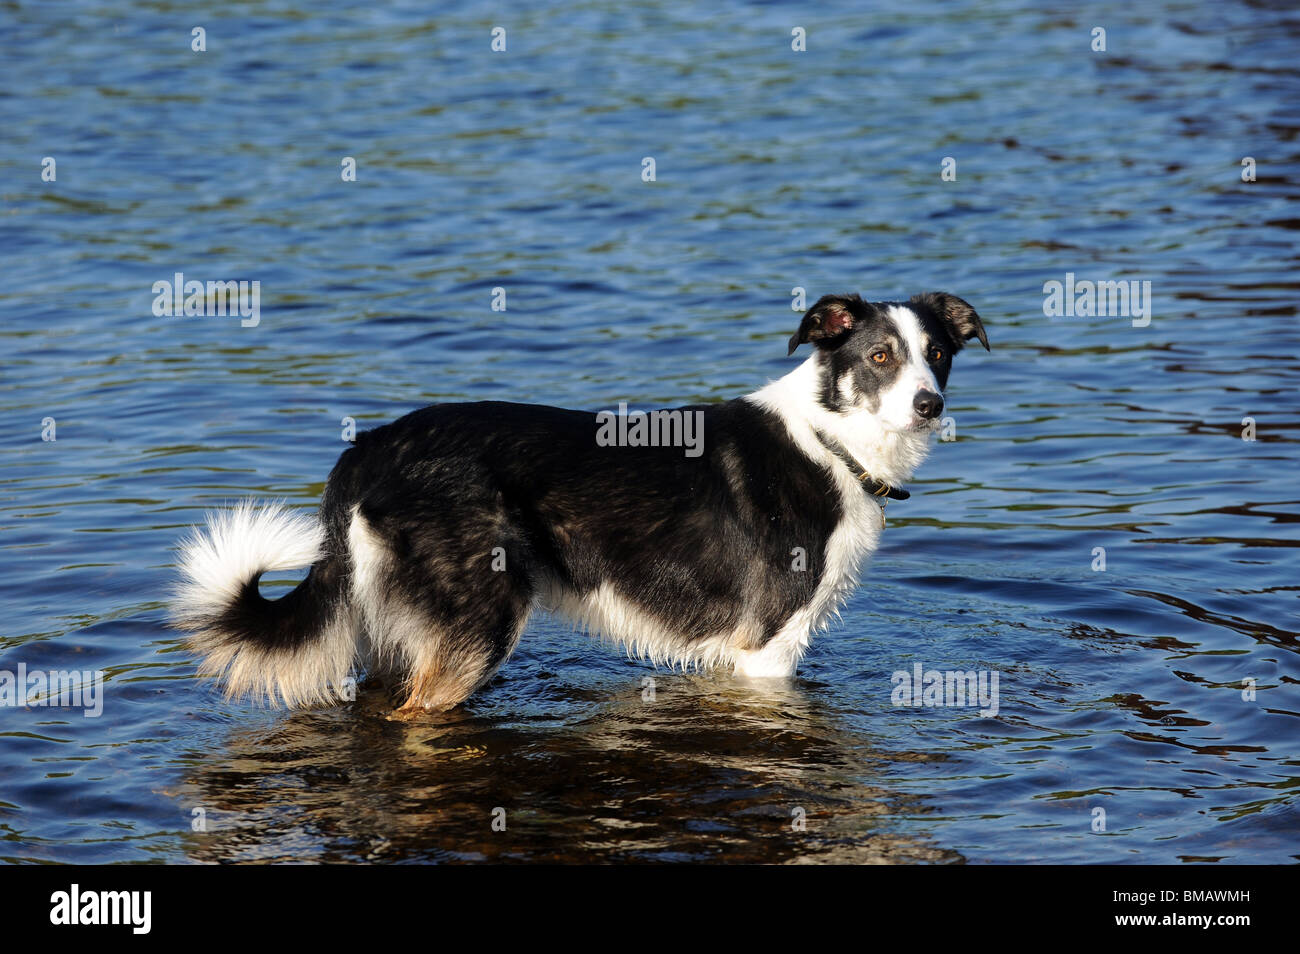 Border collie standing in water Stock Photo